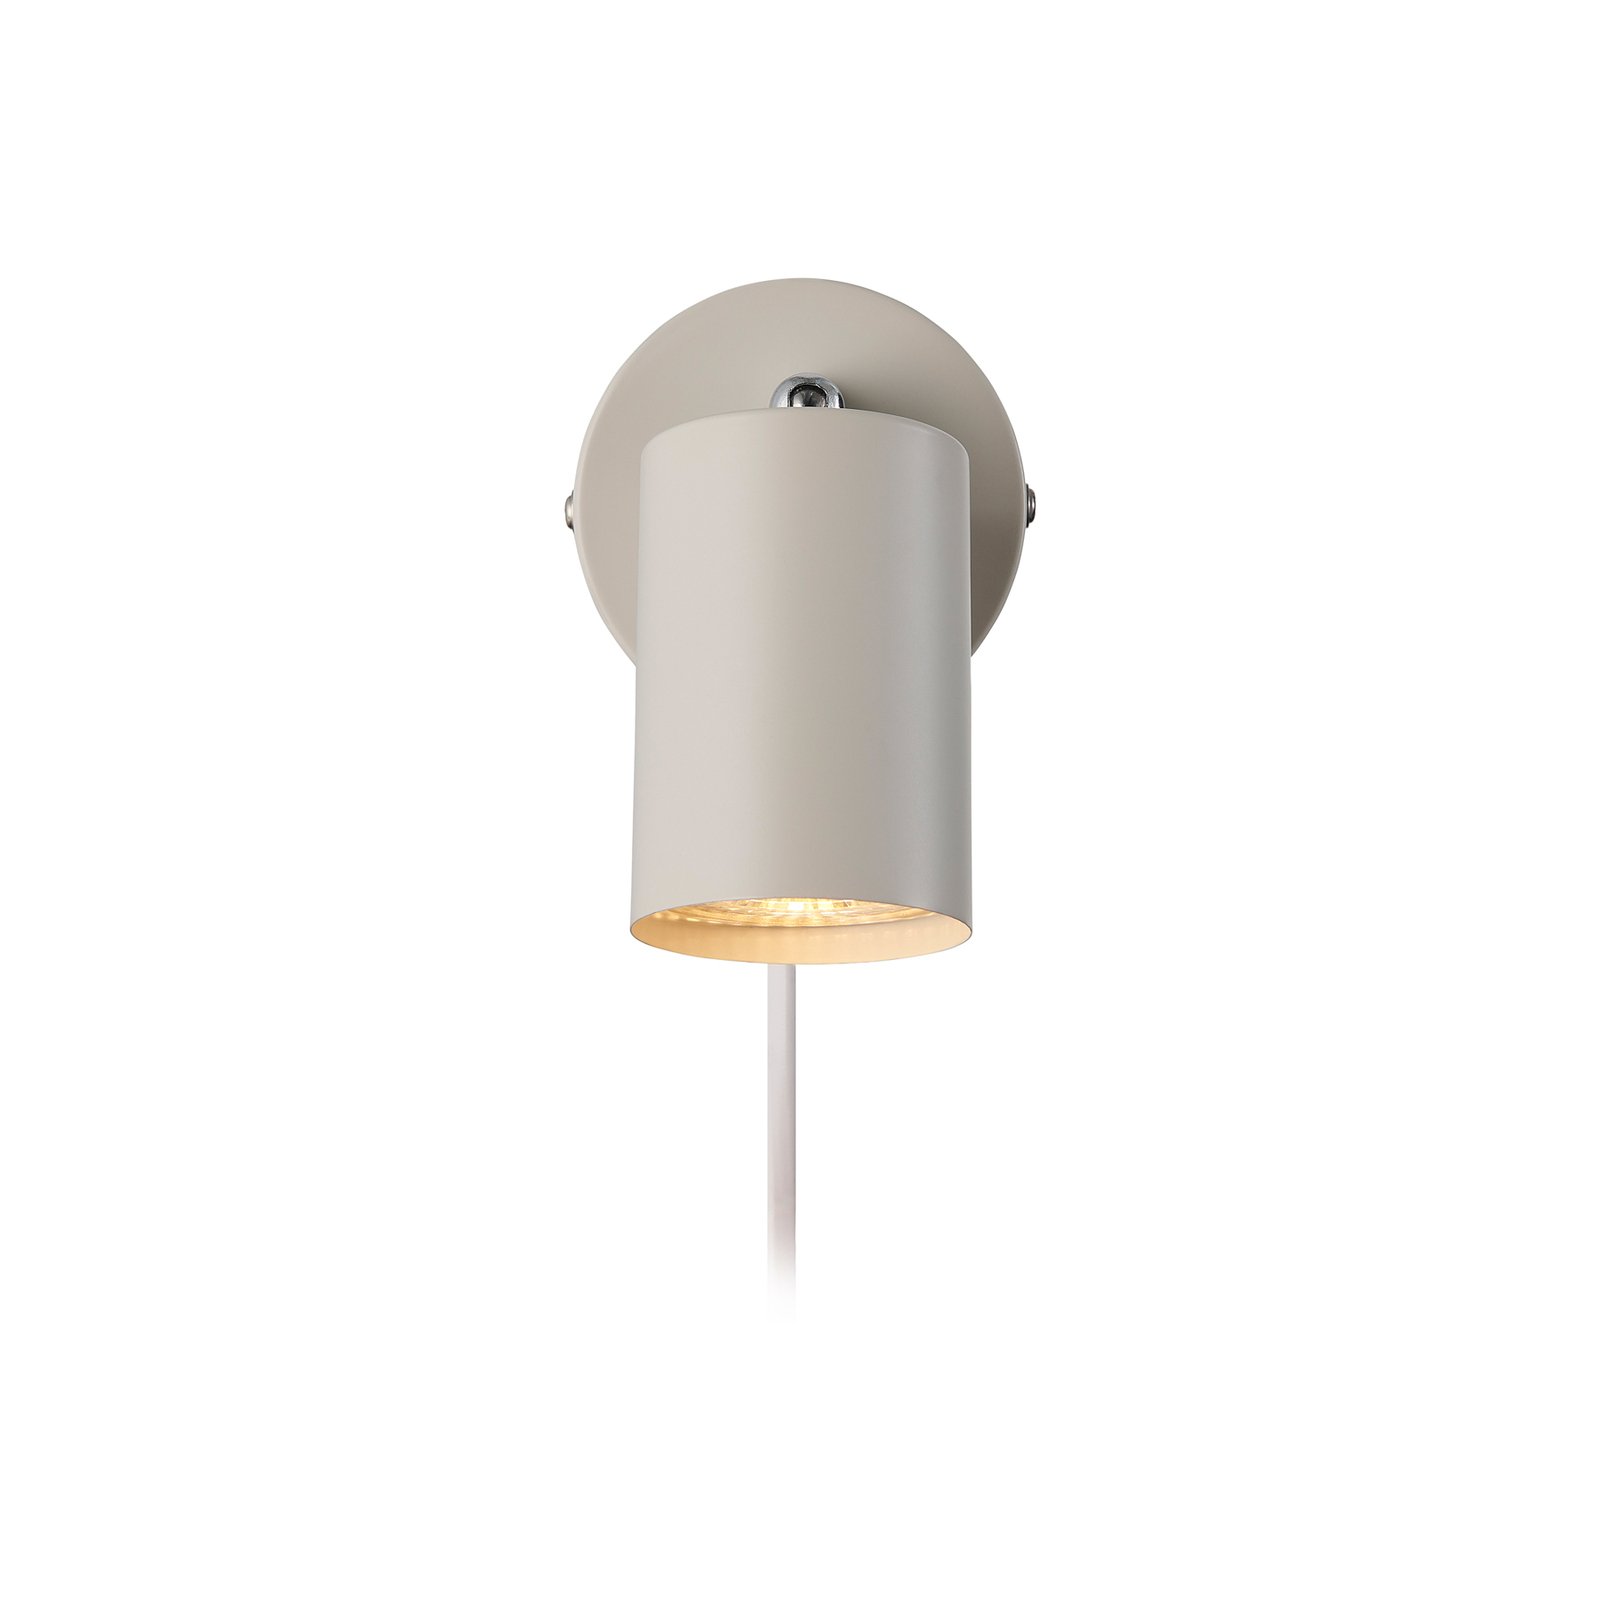 Explore wall spotlight with cable and plug, GU10, beige